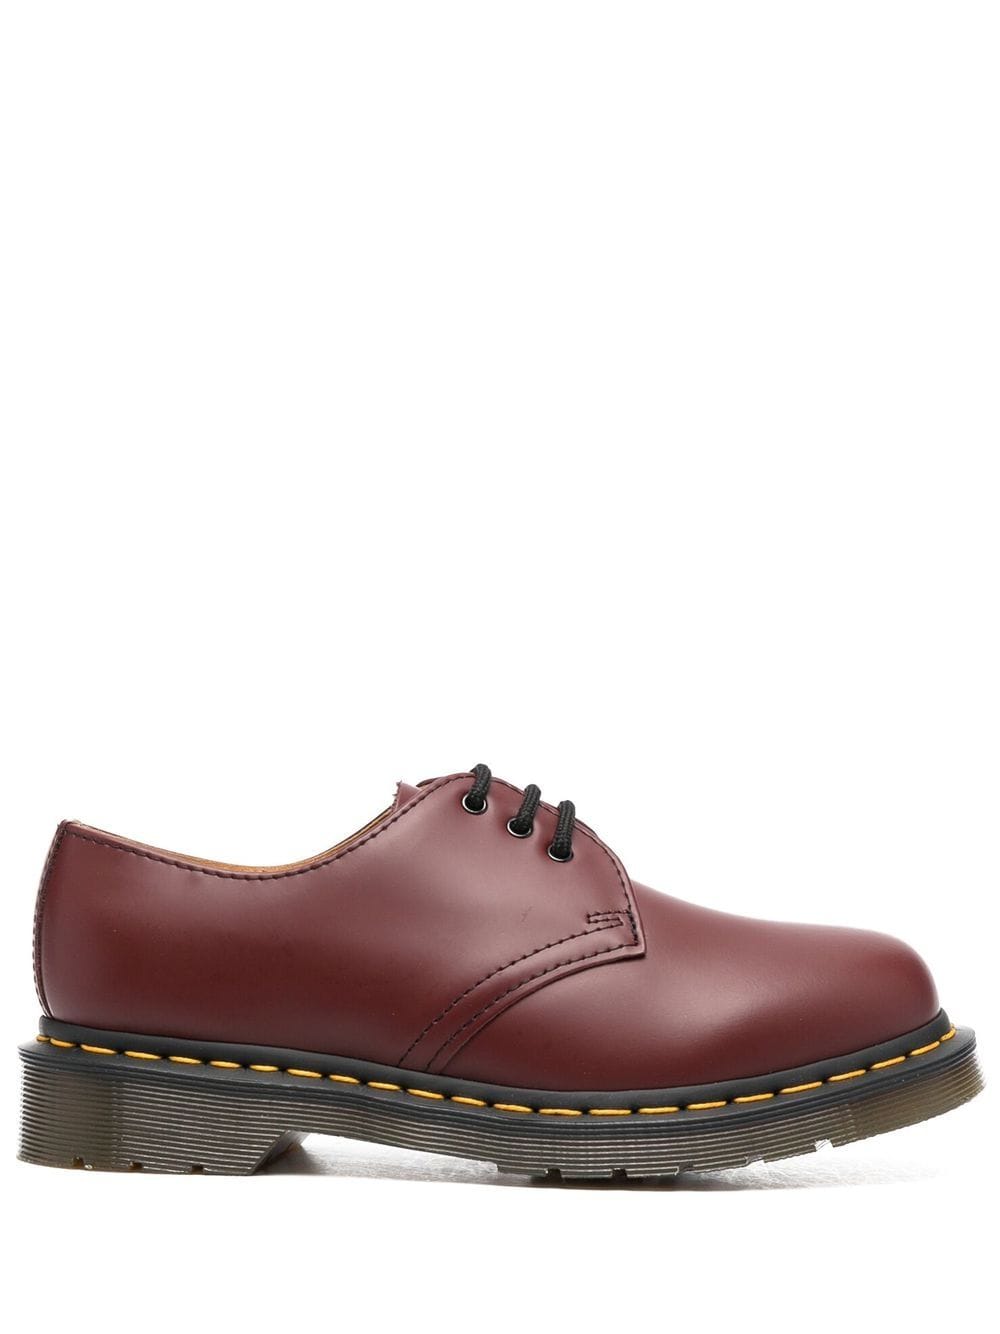 1461 leather Oxford shoes